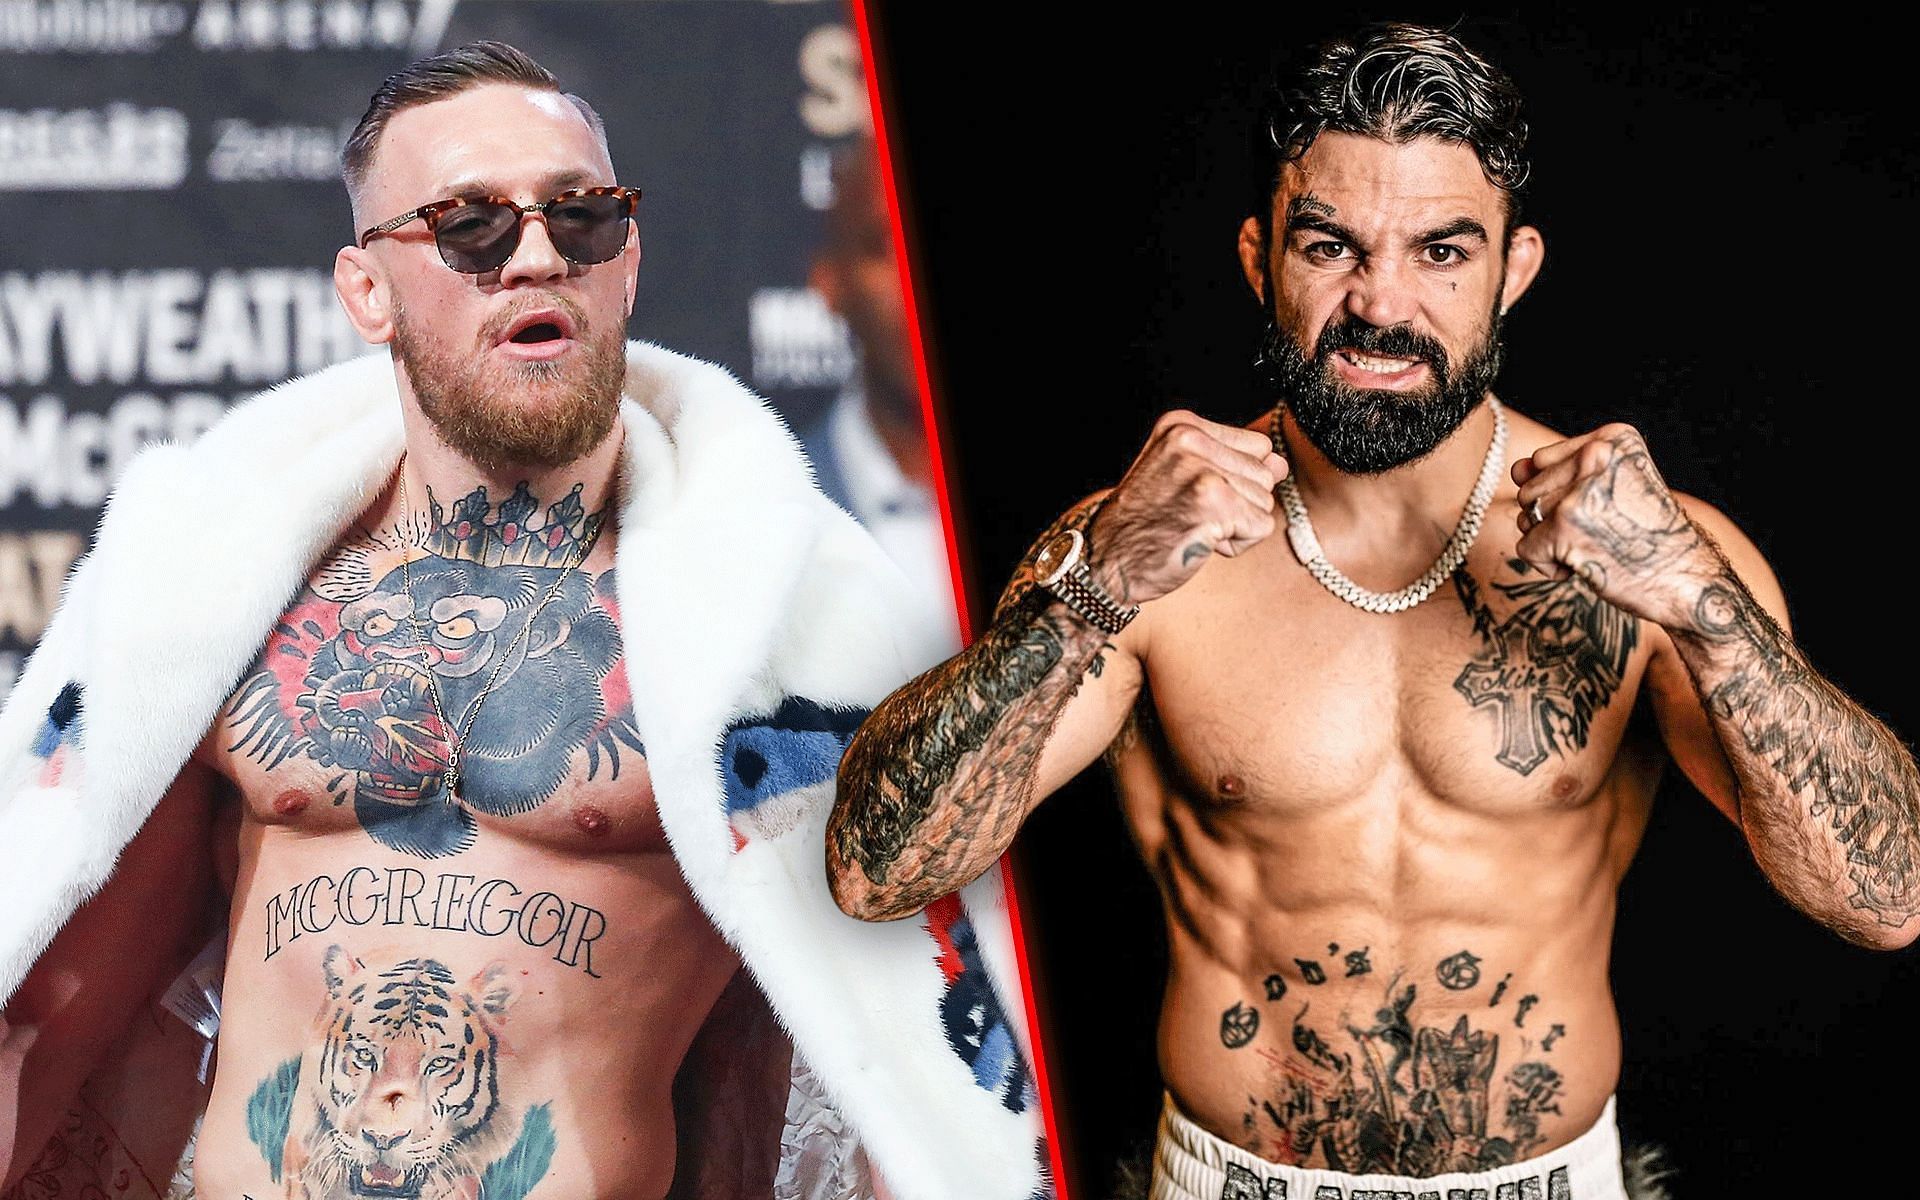 Conor McGregor (left) and Mike Perry (right) are viewed as the biggest draw in the UFC and BKFC respectively [Images courtesy: Getty Images and @platinummikeperry on Instagram]